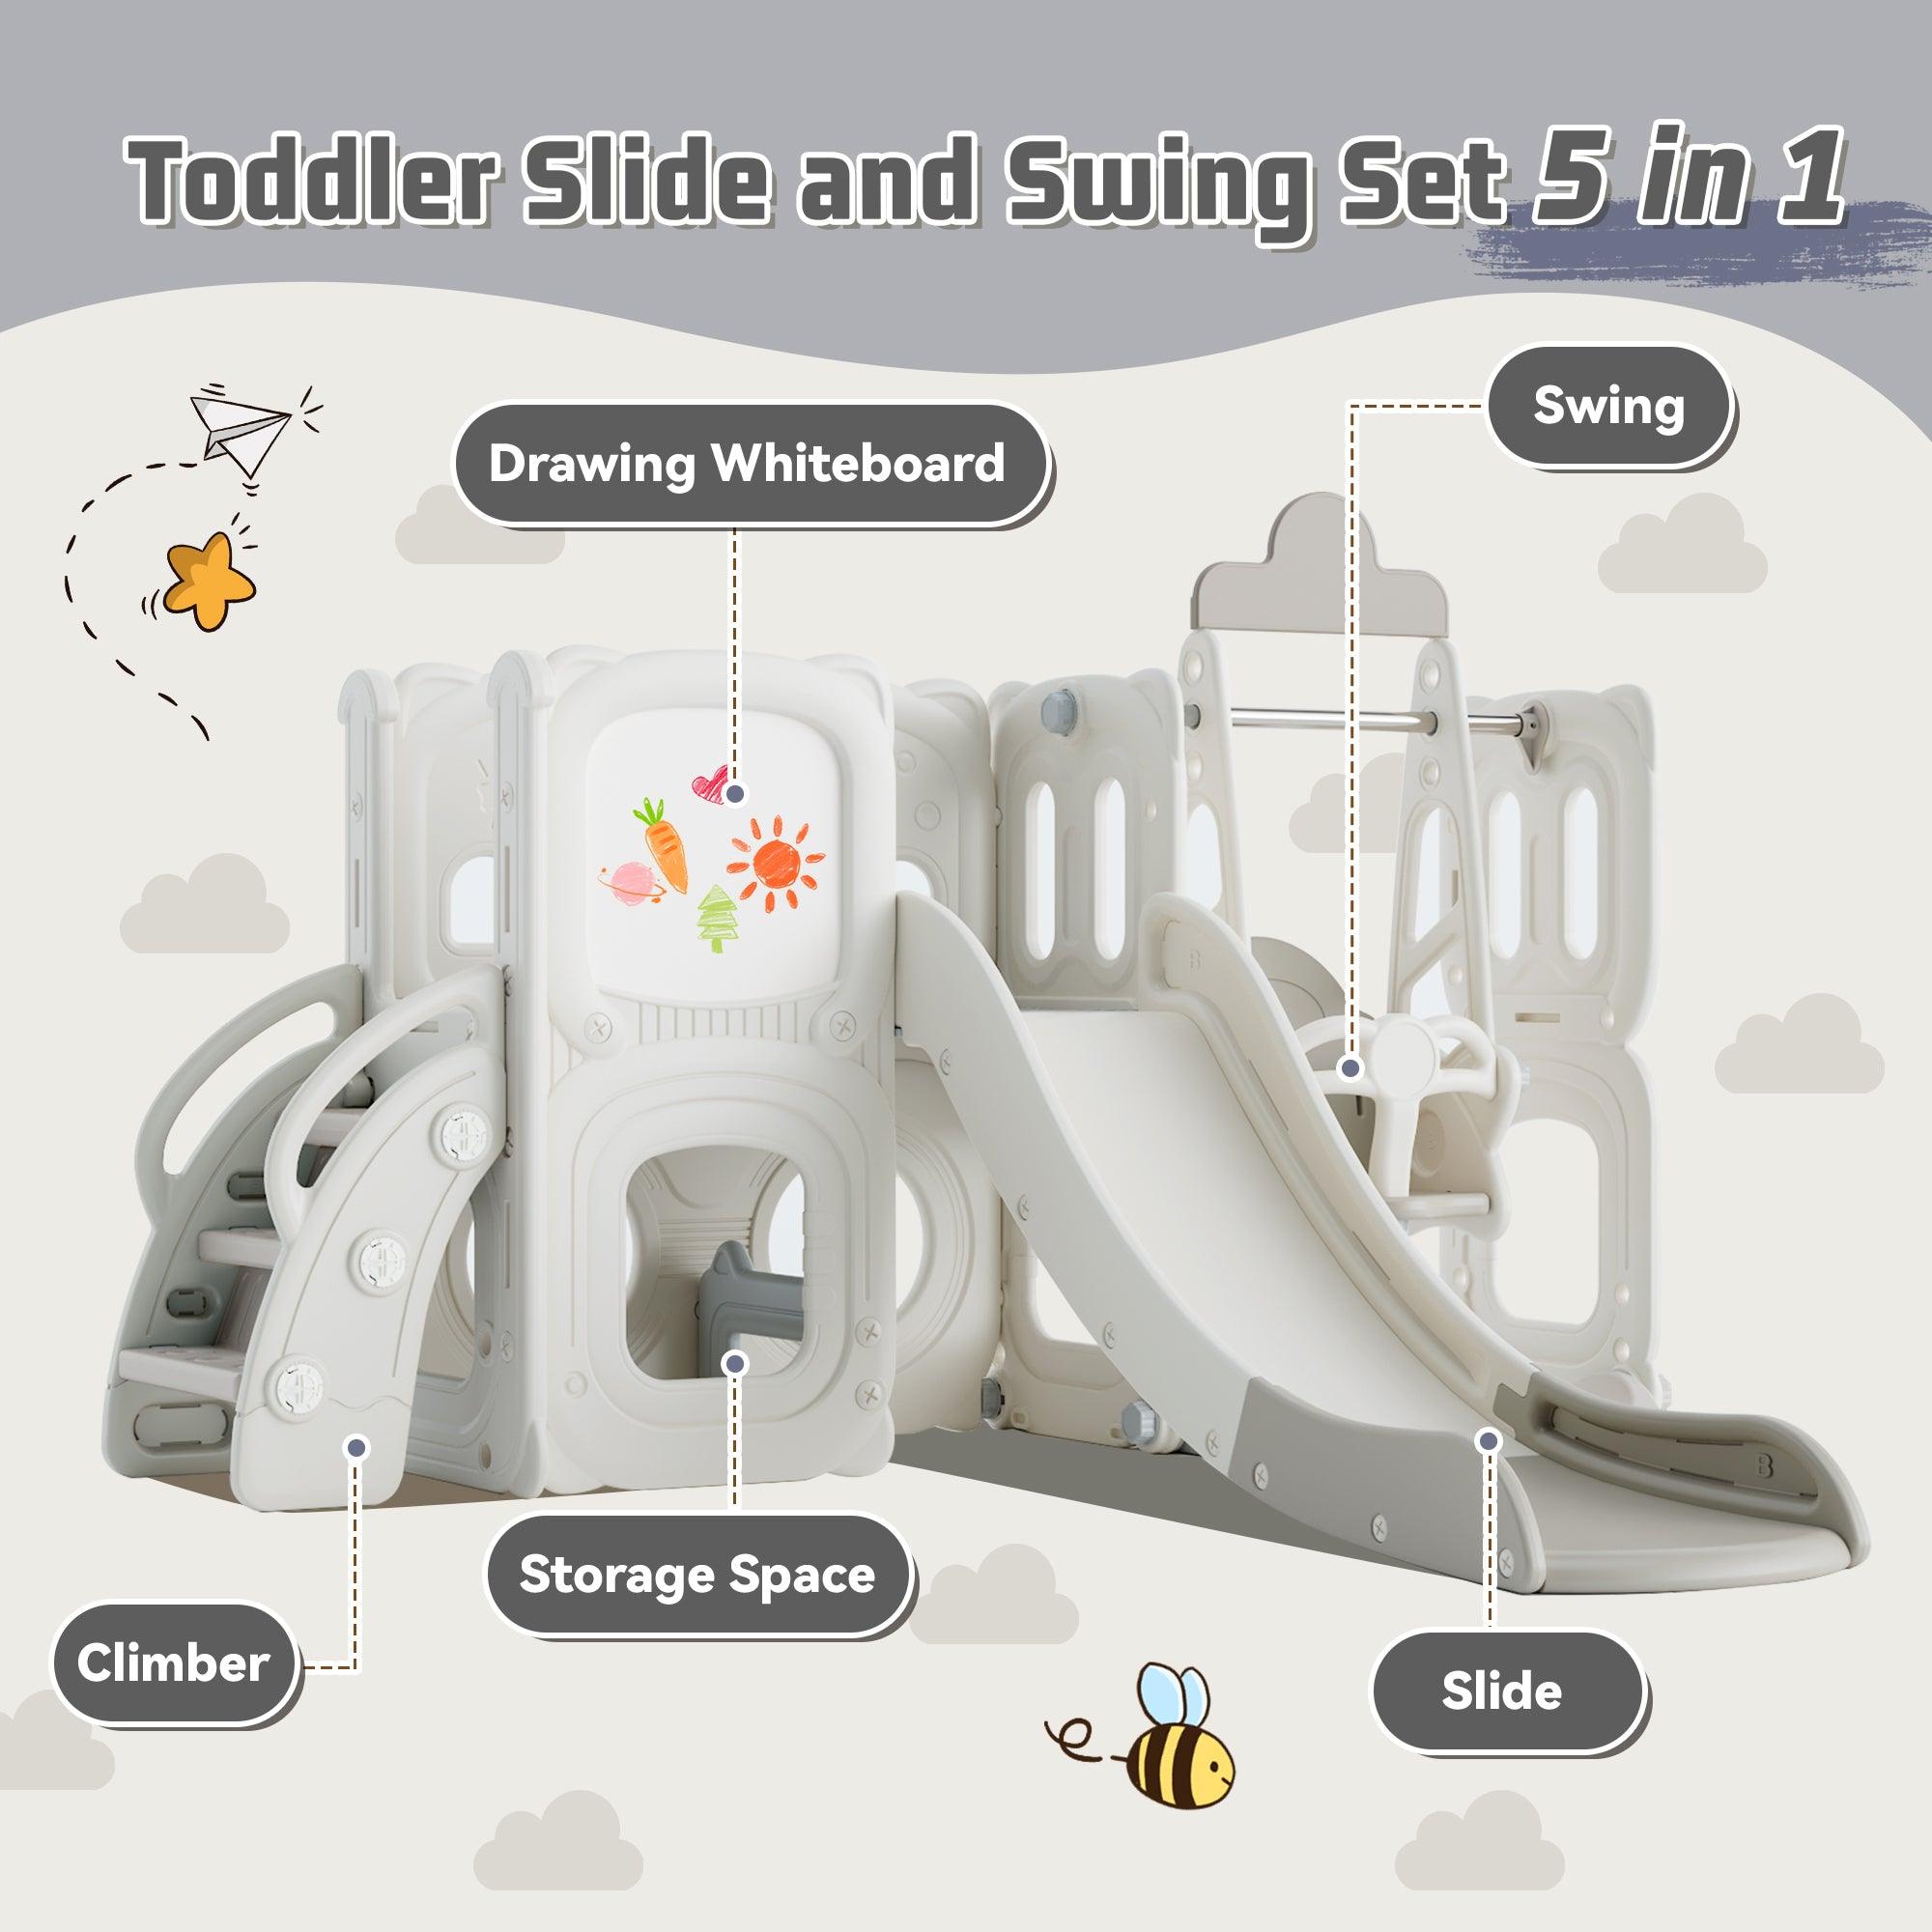 🆓🚛 5 in 1 Toddler Slide & Swing Set, Kids Playground Climber Slide Playset With Drawing Whiteboard for Babies, Gray